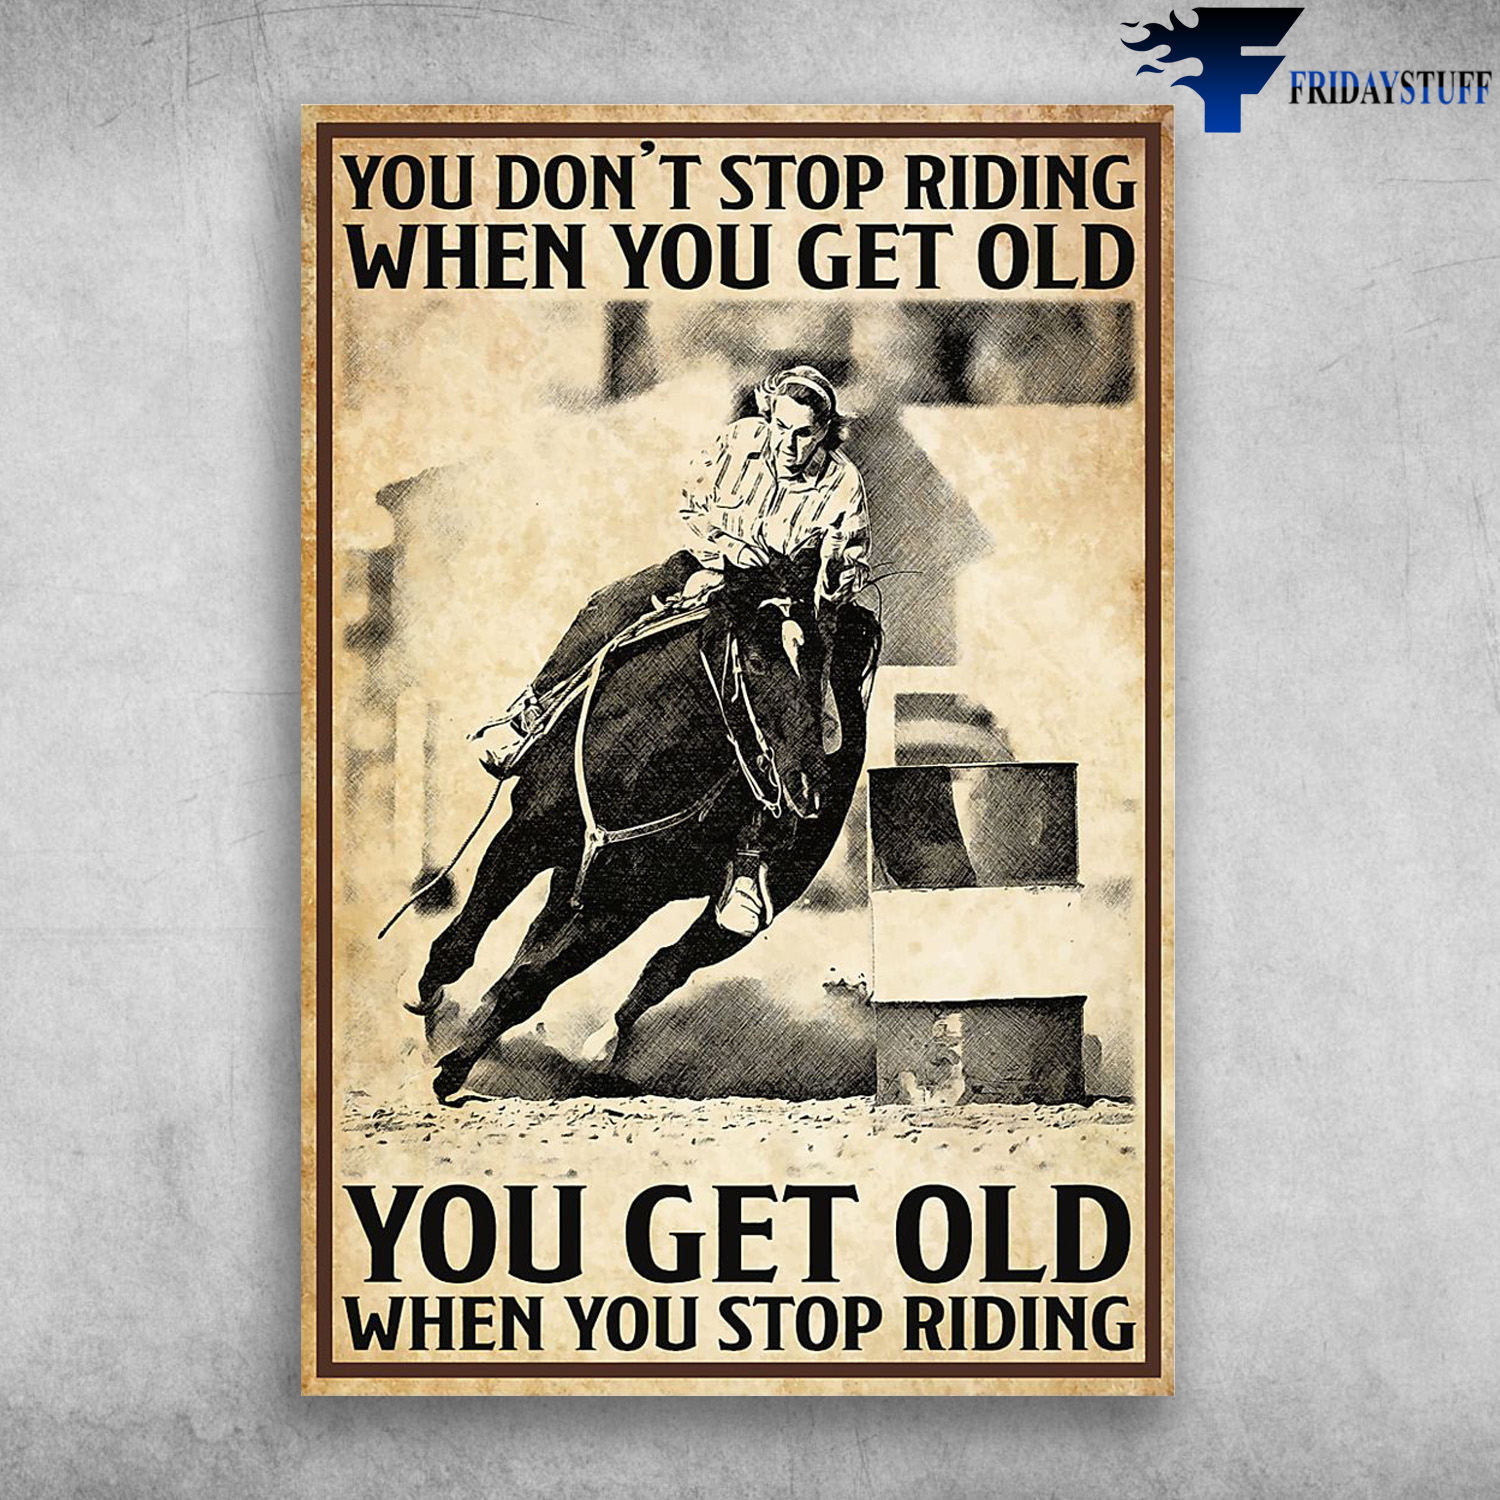 The Girl Riding Horse - You Don't Stop Riding When You Get Old, You Get Old When You Are Stop Riding